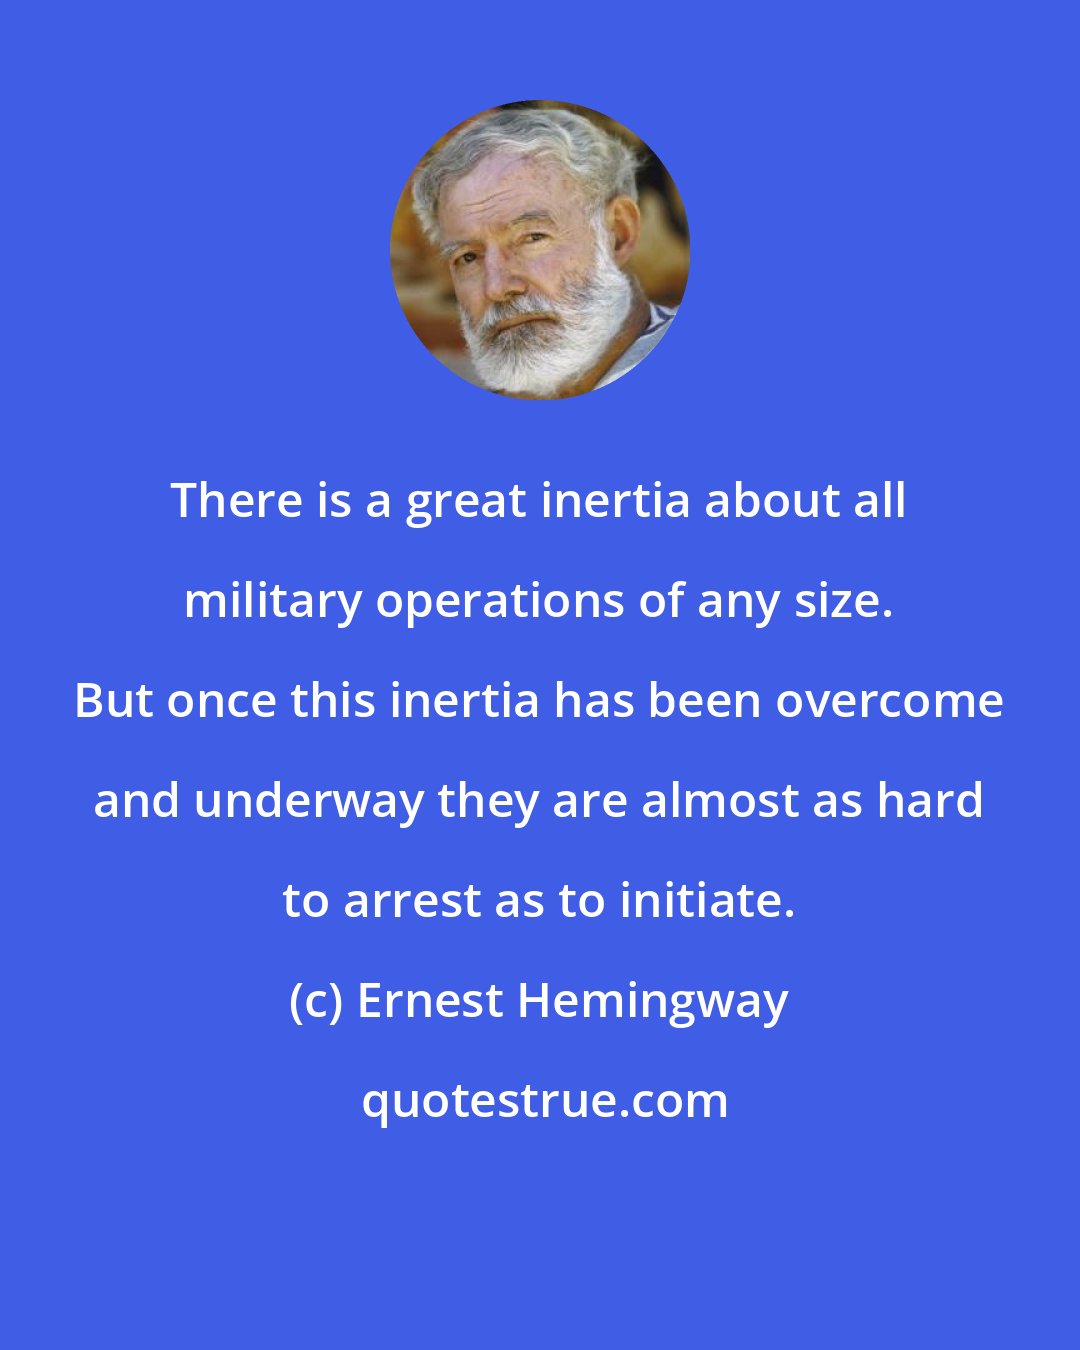 Ernest Hemingway: There is a great inertia about all military operations of any size. But once this inertia has been overcome and underway they are almost as hard to arrest as to initiate.